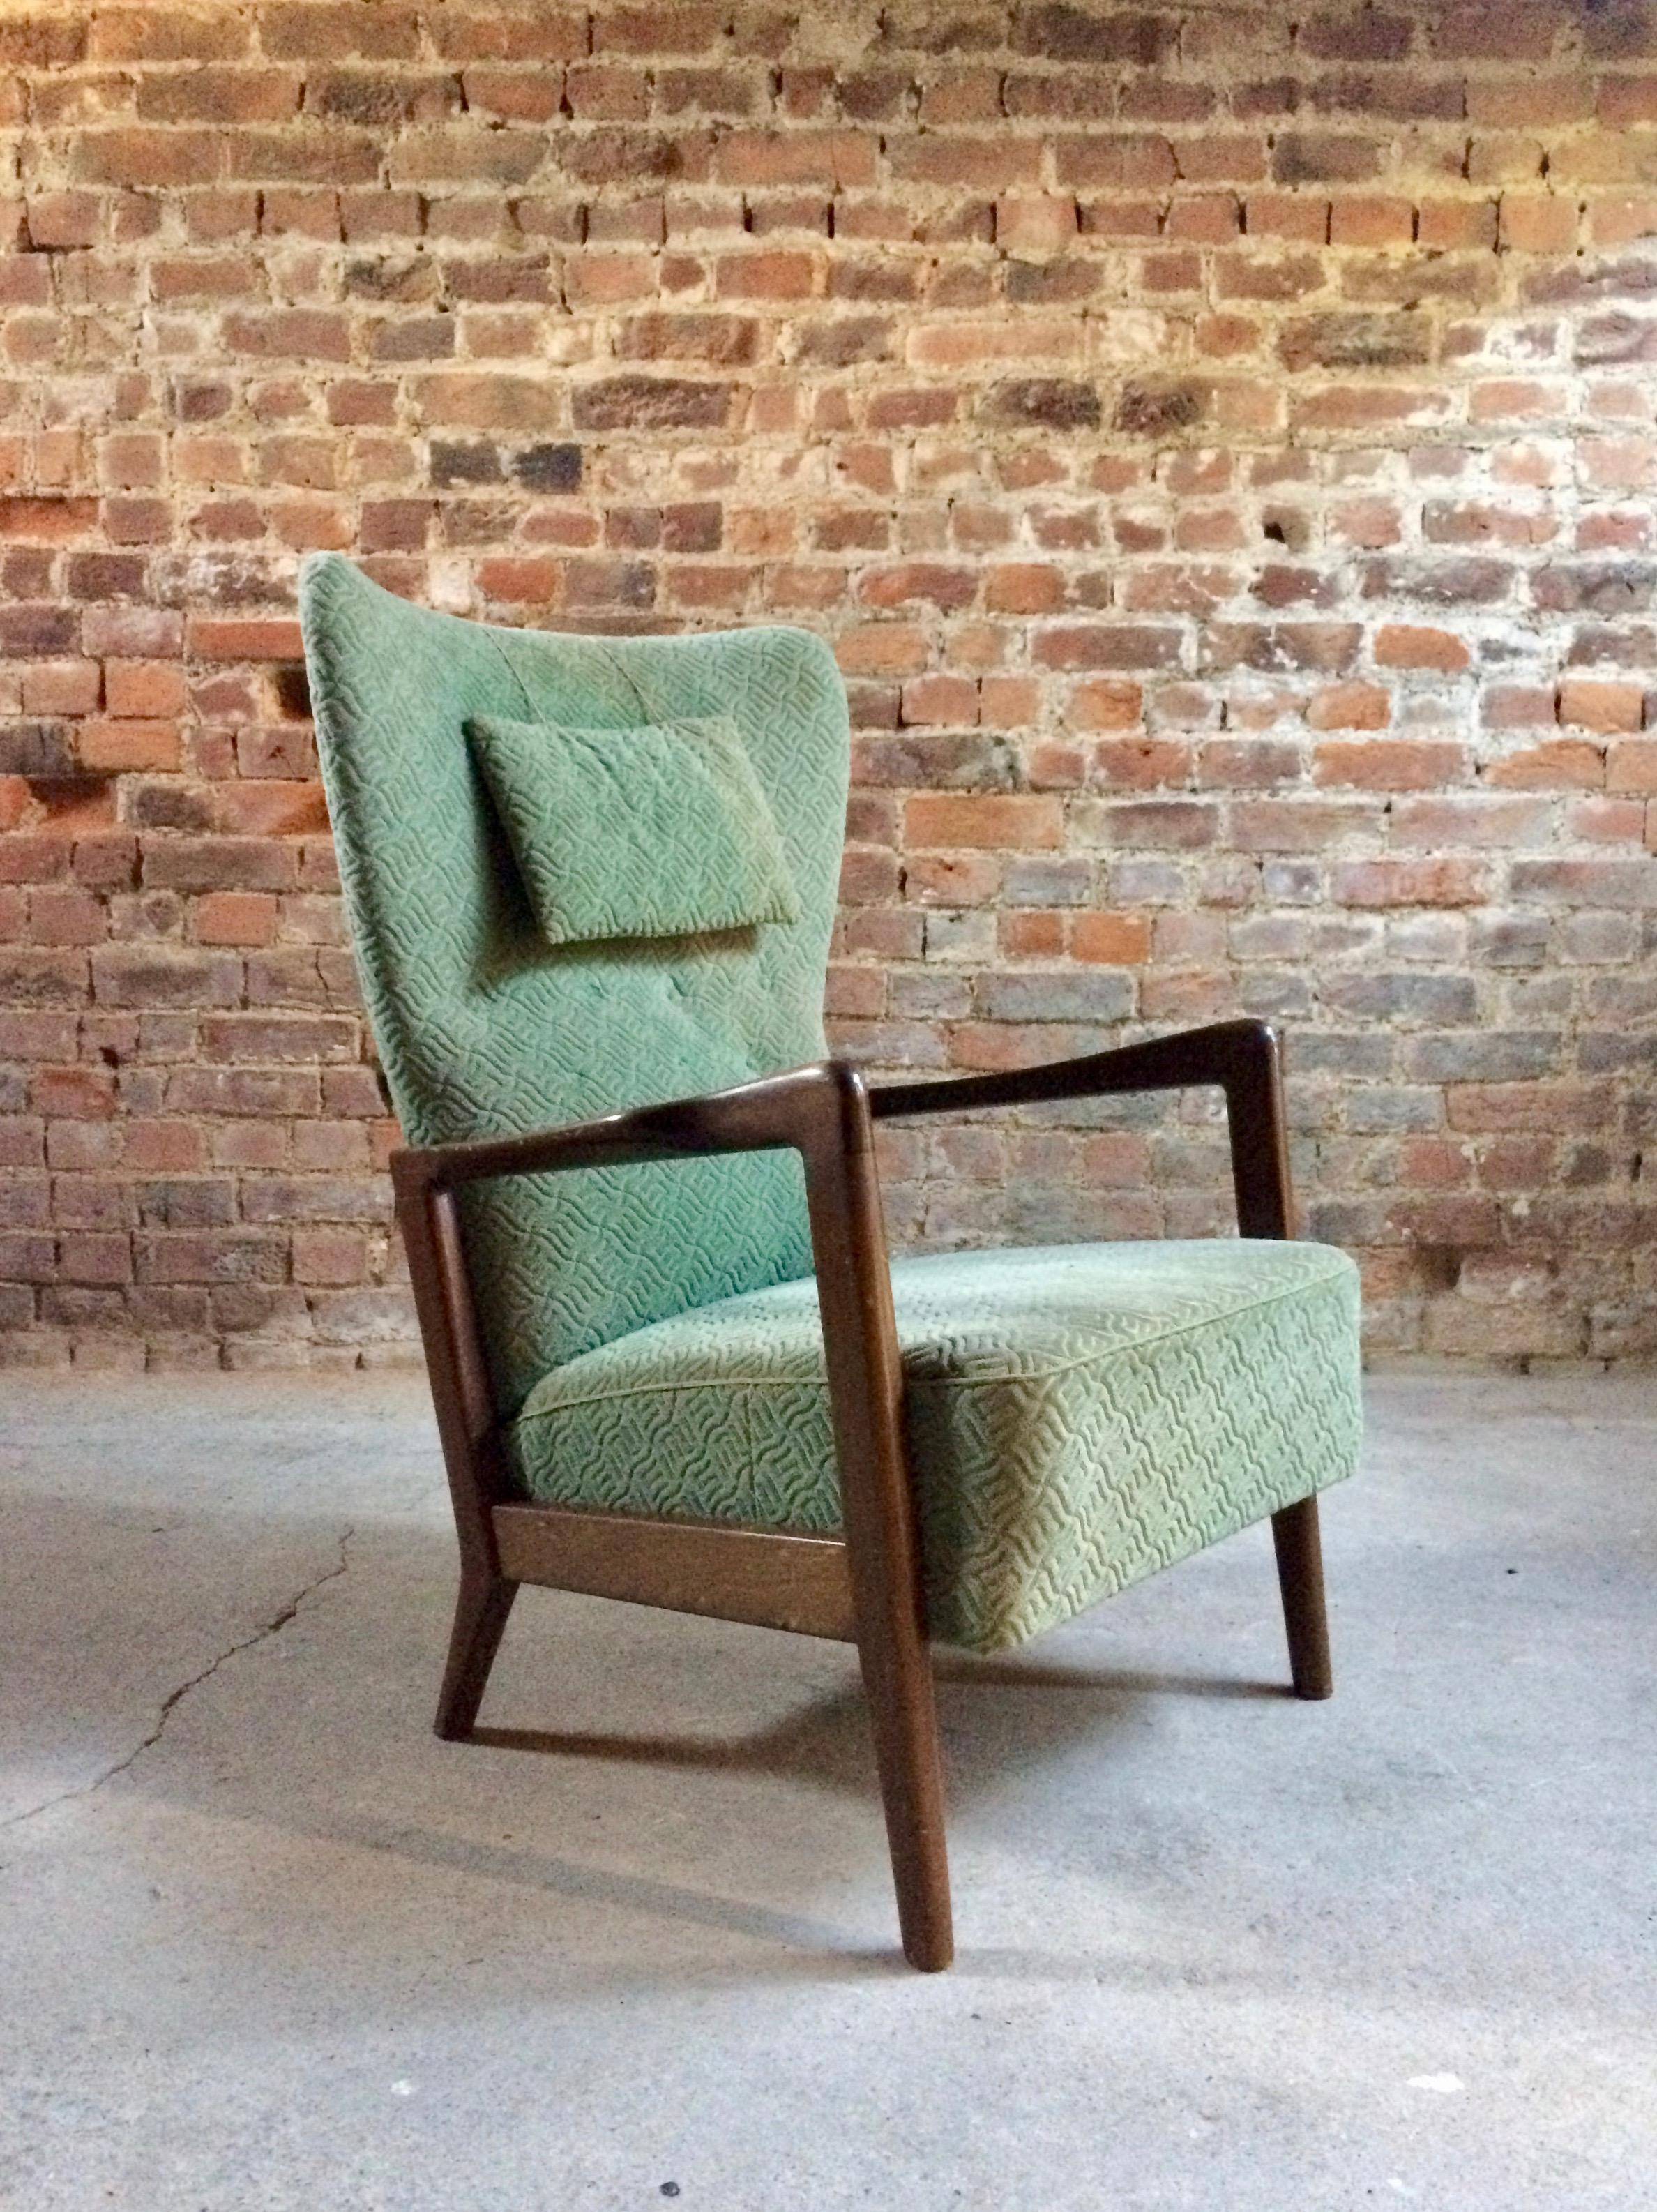 Magnificent Soren Hansen high wingback lounge chair by Fritz Hansen dating from the 1950s, the chair is offered in original condition with a gorgeous stained beech frame and classic green upholstery, high backrest, original high quality wool